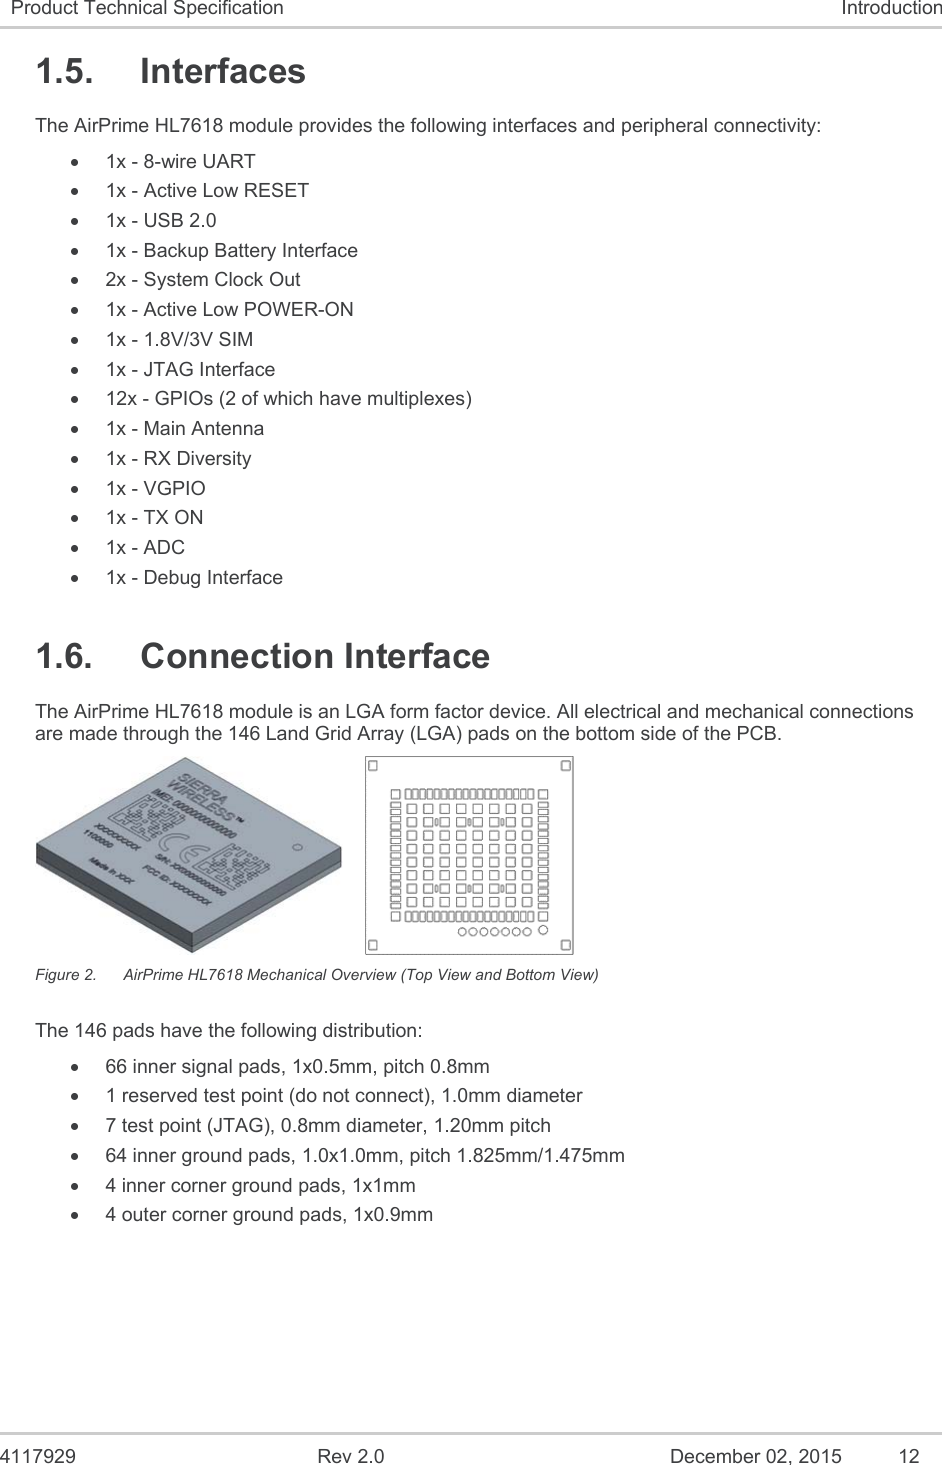  4117929  Rev 2.0  December 02, 2015  12 Product Technical Specification  Introduction 1.5.  Interfaces The AirPrime HL7618 module provides the following interfaces and peripheral connectivity:  1x - 8-wire UART   1x - Active Low RESET   1x - USB 2.0   1x - Backup Battery Interface   2x - System Clock Out   1x - Active Low POWER-ON   1x - 1.8V/3V SIM   1x - JTAG Interface    12x - GPIOs (2 of which have multiplexes)   1x - Main Antenna   1x - RX Diversity  1x - VGPIO  1x - TX ON   1x - ADC   1x - Debug Interface 1.6.  Connection Interface The AirPrime HL7618 module is an LGA form factor device. All electrical and mechanical connections are made through the 146 Land Grid Array (LGA) pads on the bottom side of the PCB.     Figure 2.  AirPrime HL7618 Mechanical Overview (Top View and Bottom View) The 146 pads have the following distribution:   66 inner signal pads, 1x0.5mm, pitch 0.8mm   1 reserved test point (do not connect), 1.0mm diameter   7 test point (JTAG), 0.8mm diameter, 1.20mm pitch   64 inner ground pads, 1.0x1.0mm, pitch 1.825mm/1.475mm   4 inner corner ground pads, 1x1mm   4 outer corner ground pads, 1x0.9mm 